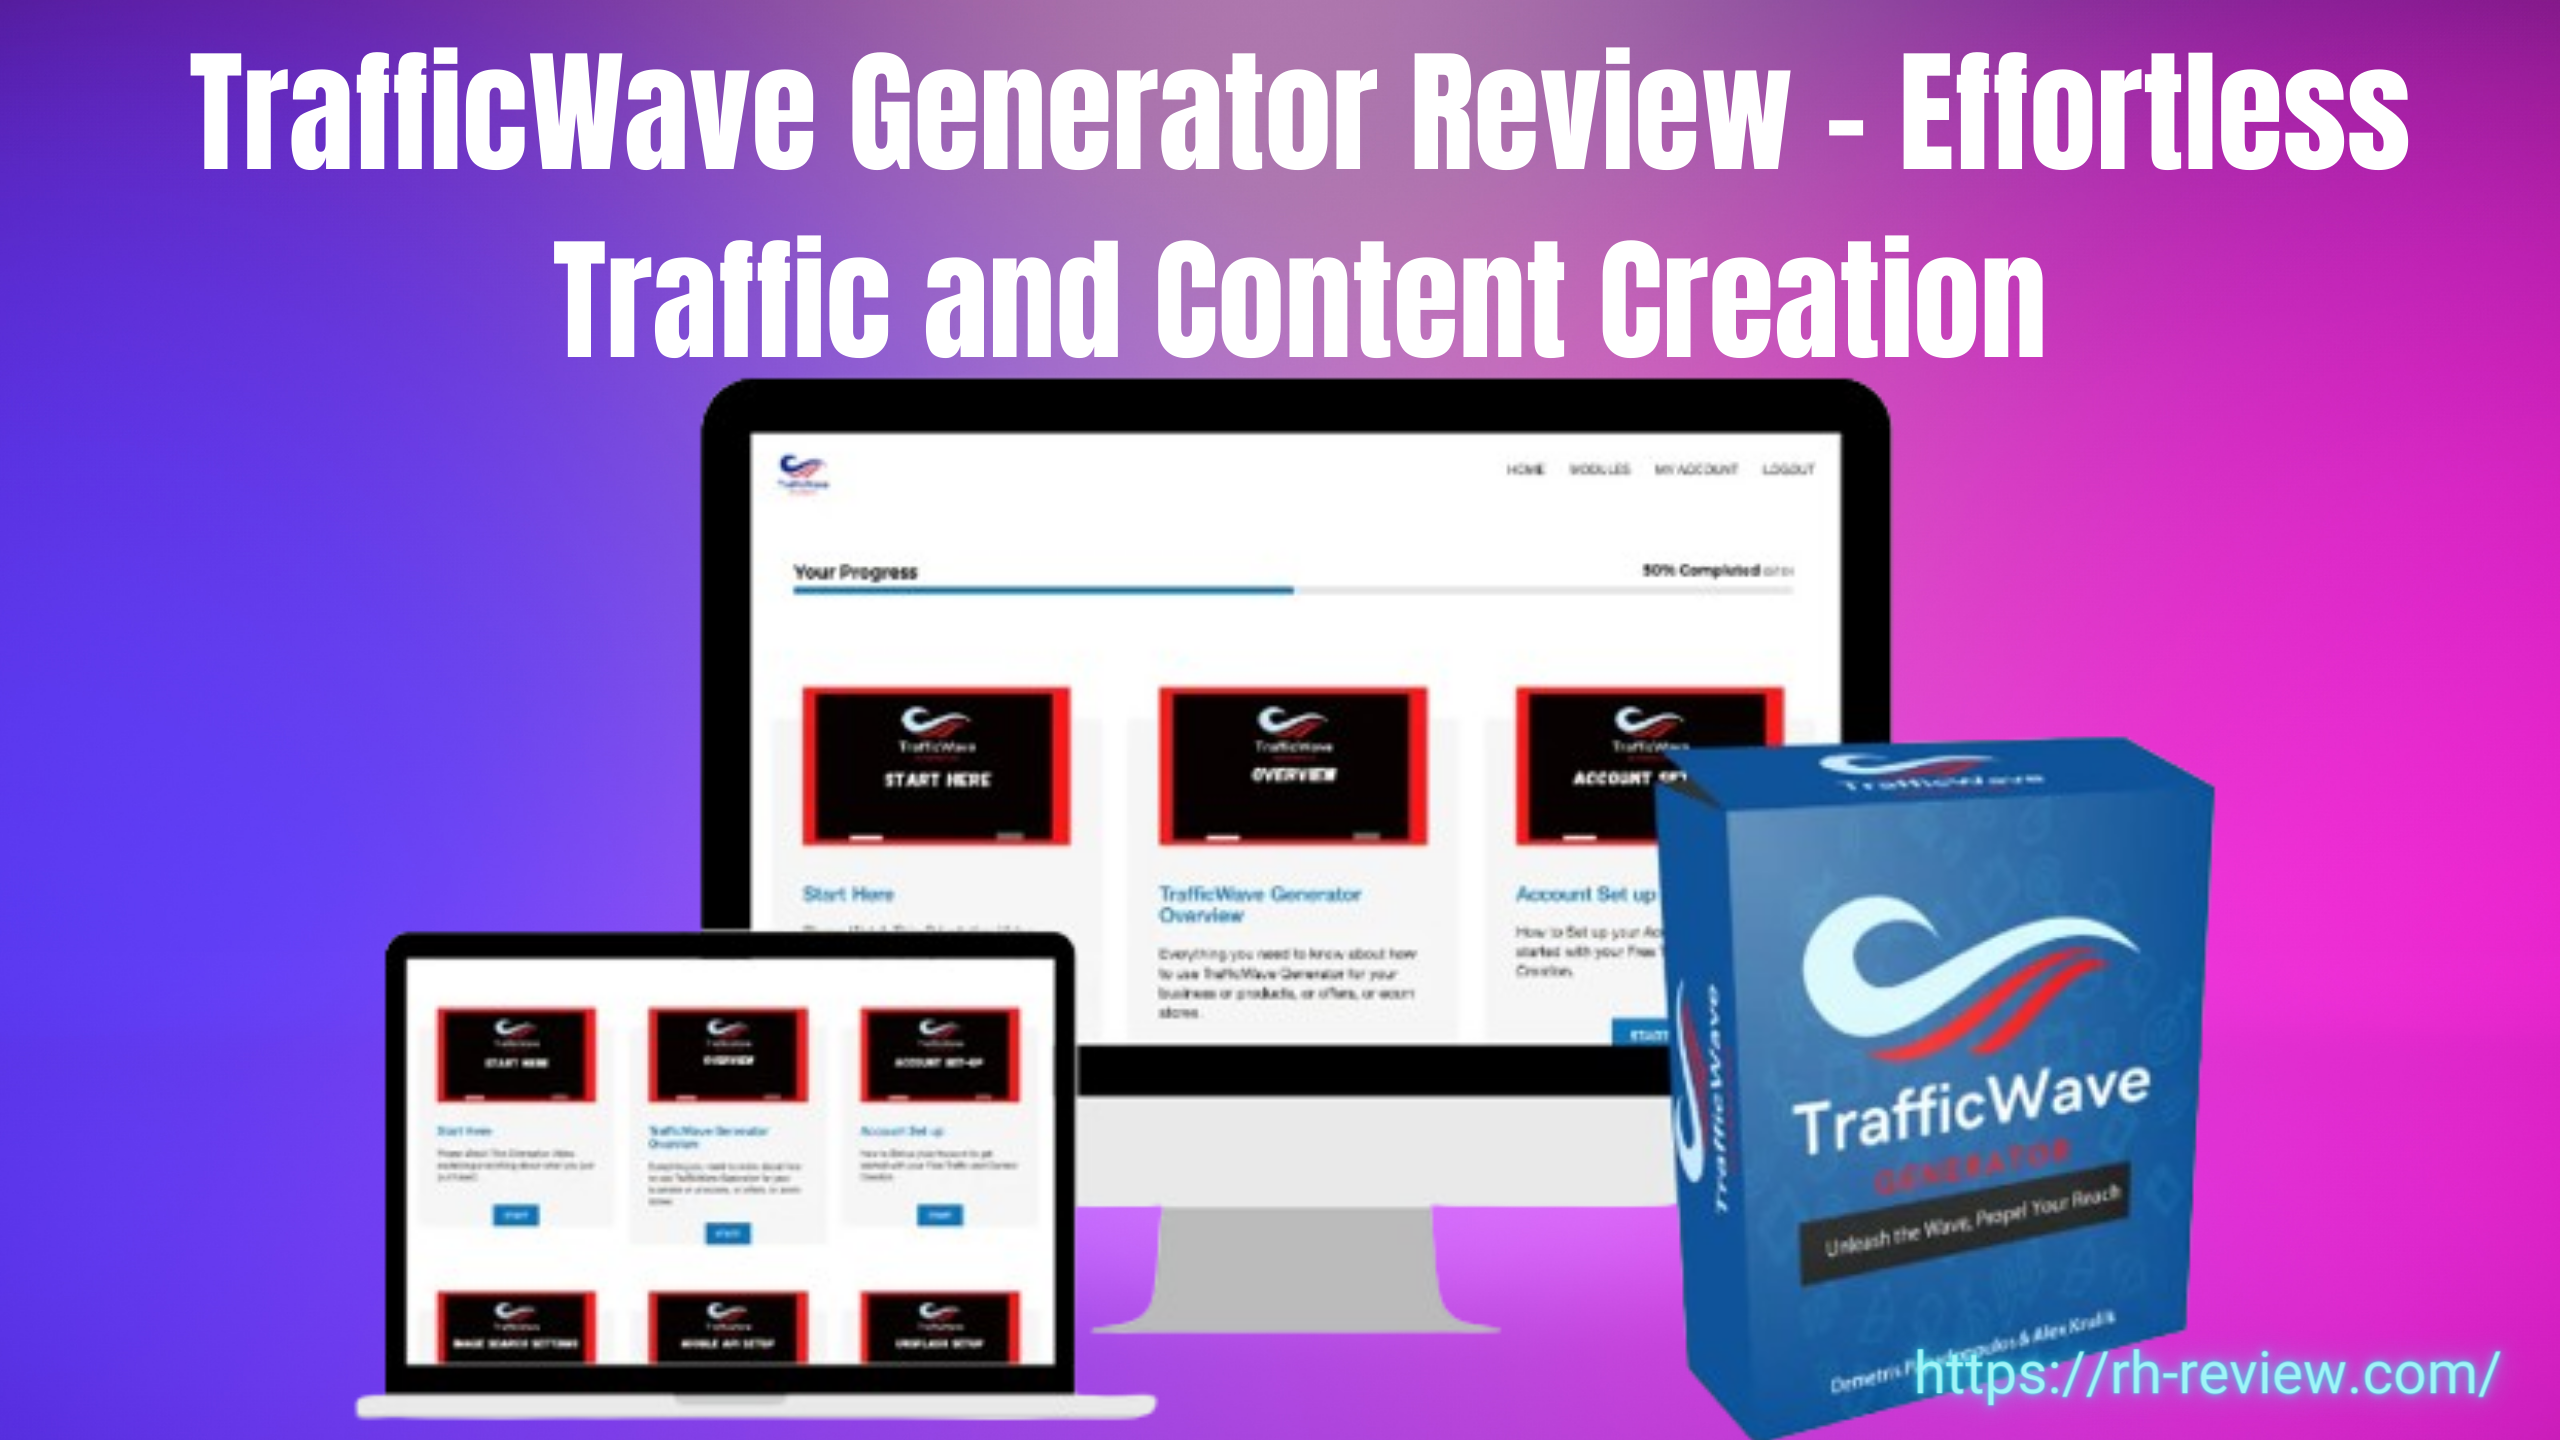 TrafficWave Generator Review - Effortless Traffic and Content